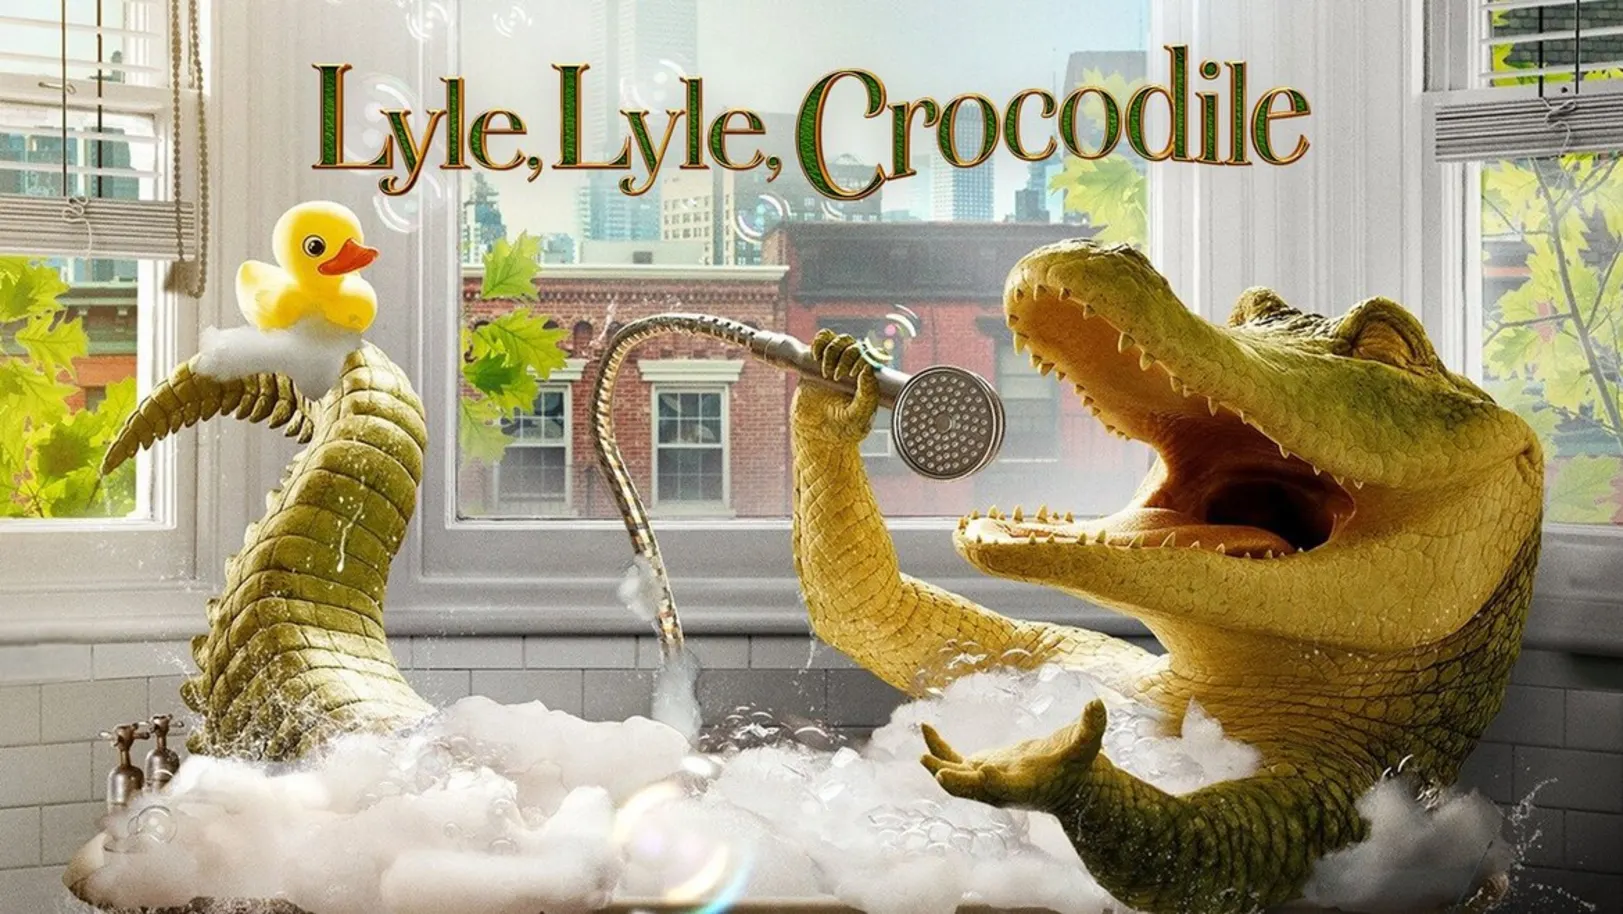 Lyle, Lyle, Crocodile Streaming Now On &Pictures HD